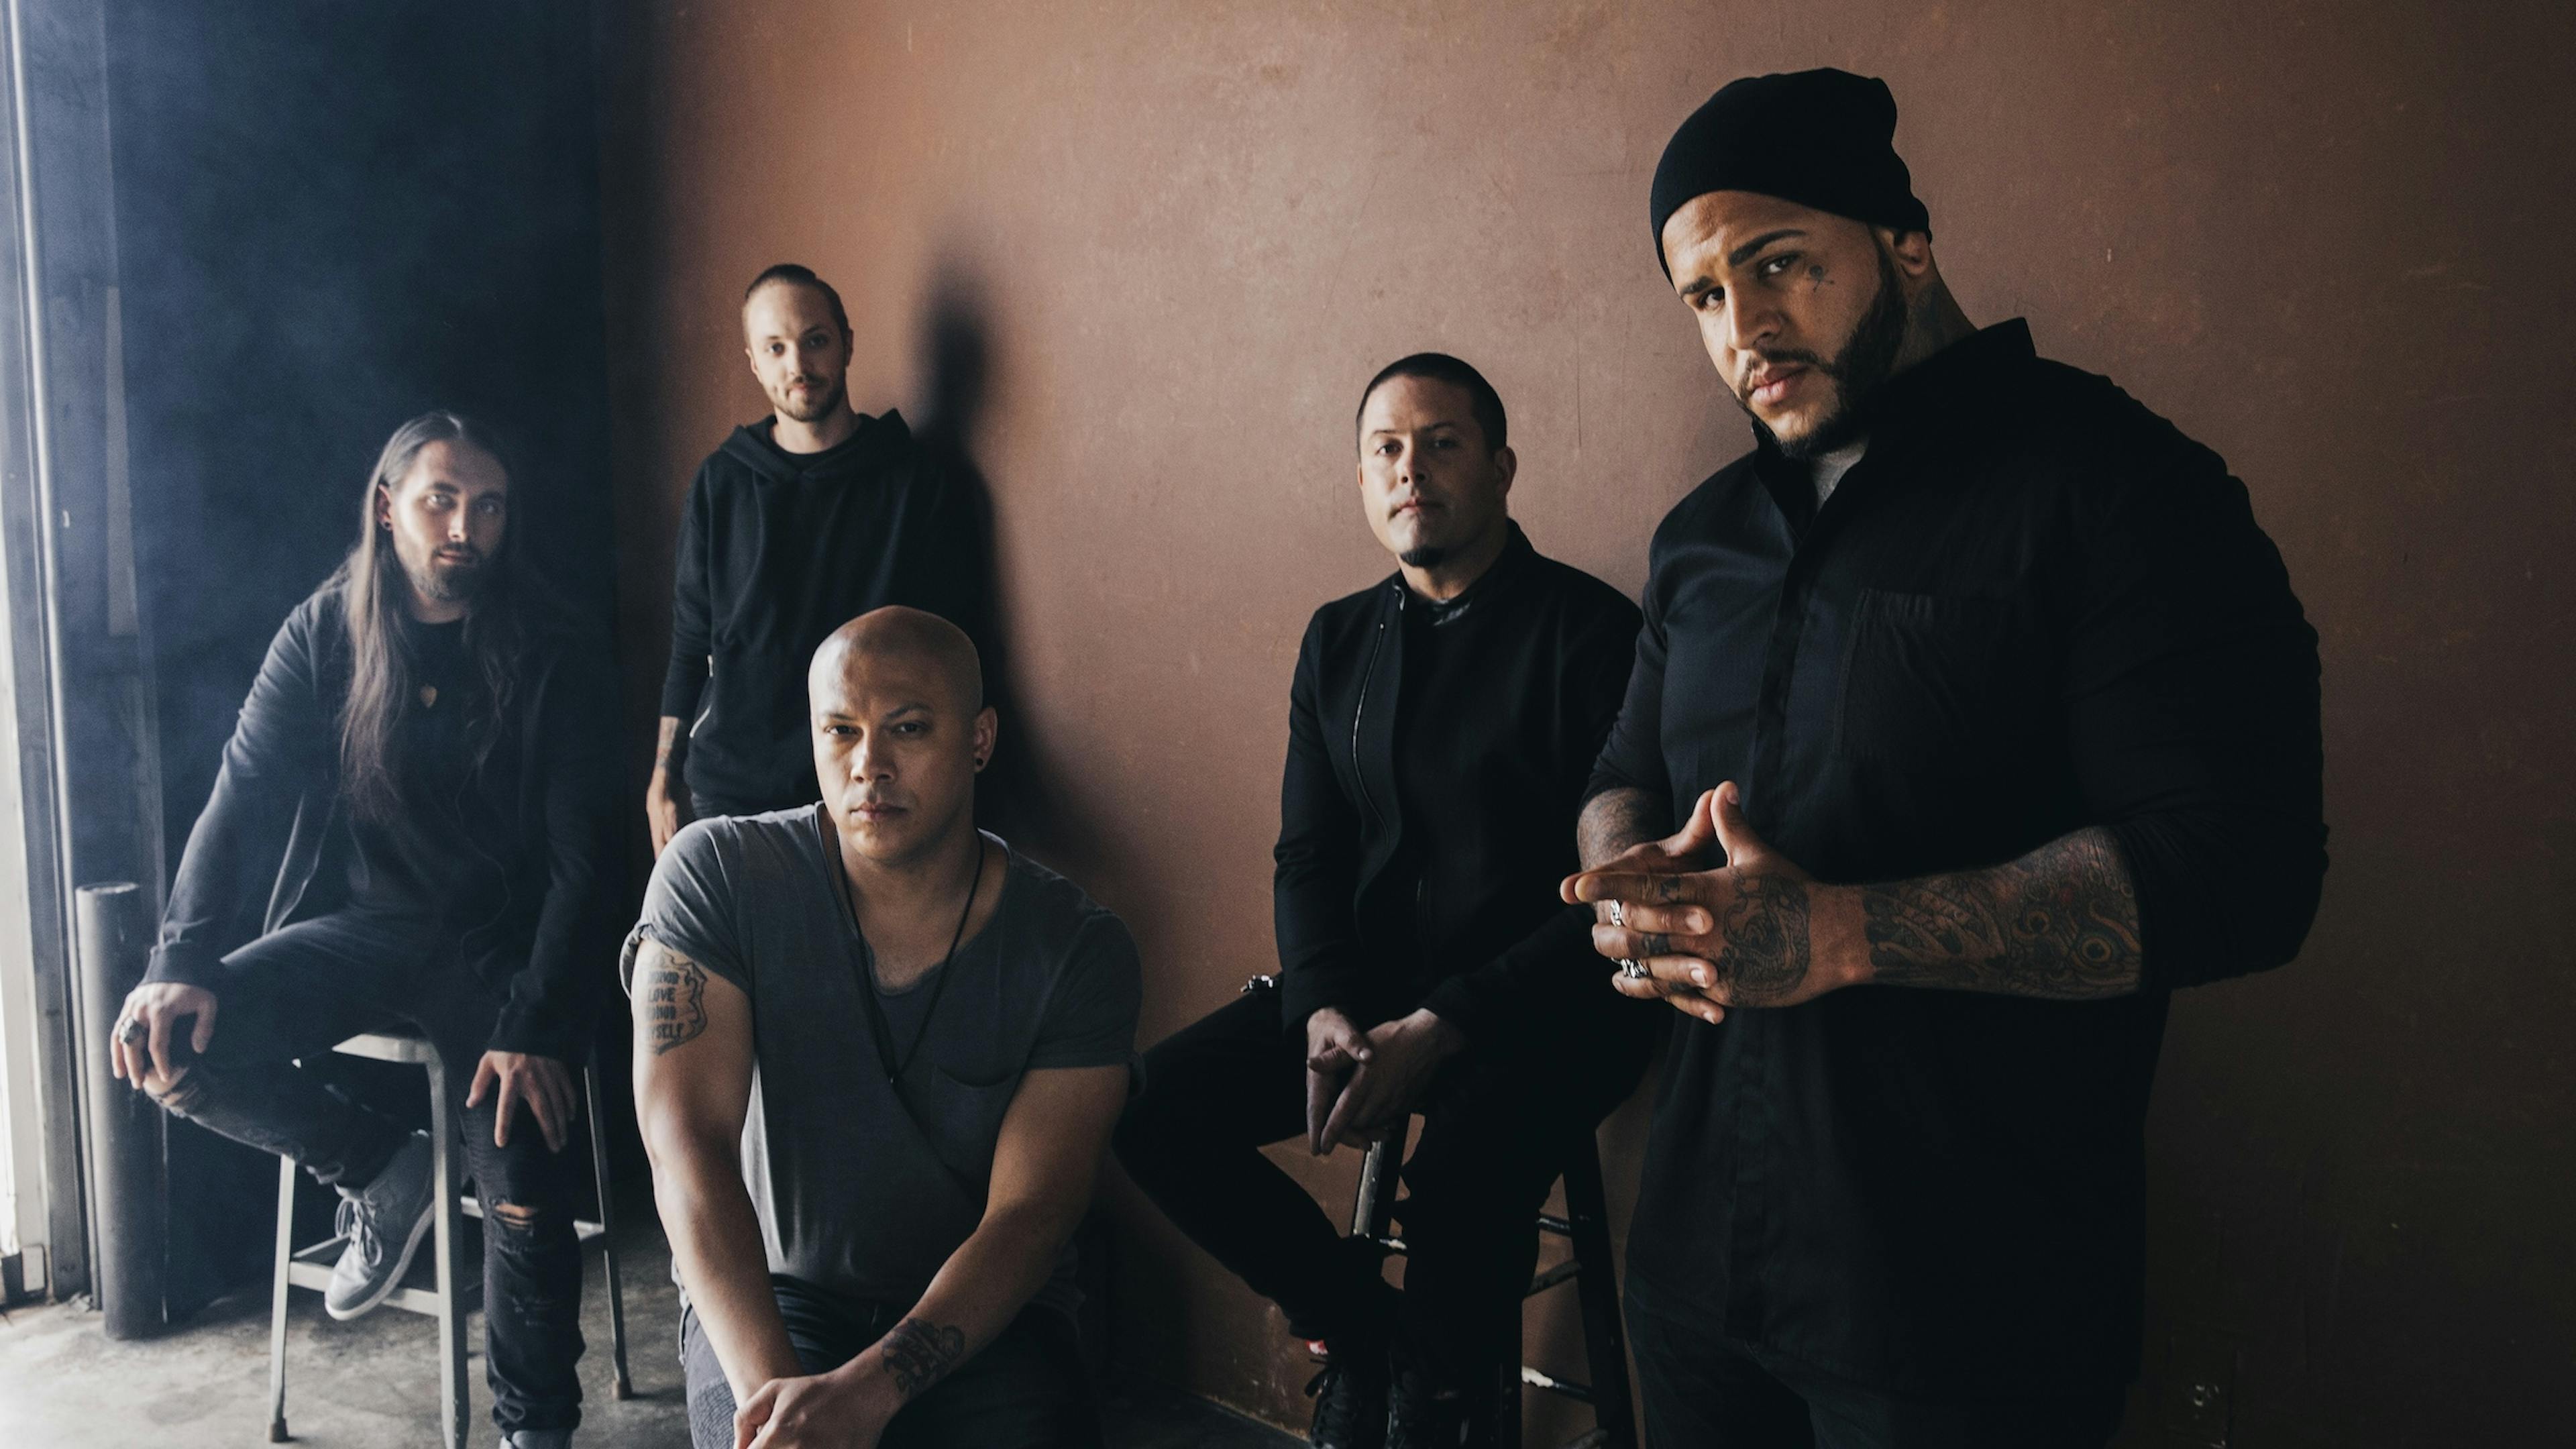 Check Out Bad Wolves' New Video For I'll Be There